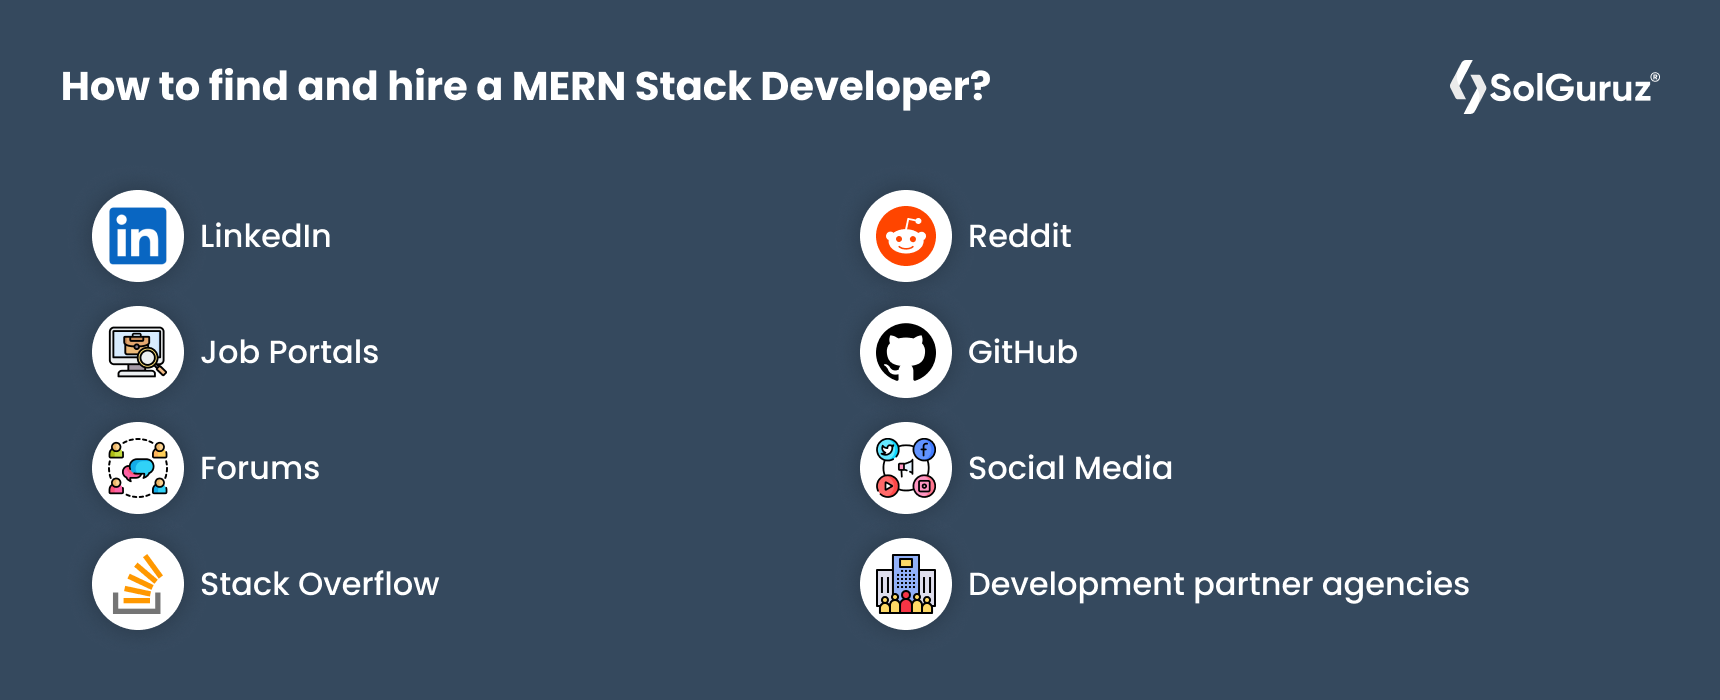 How to find and hire a MERN Stack Developer